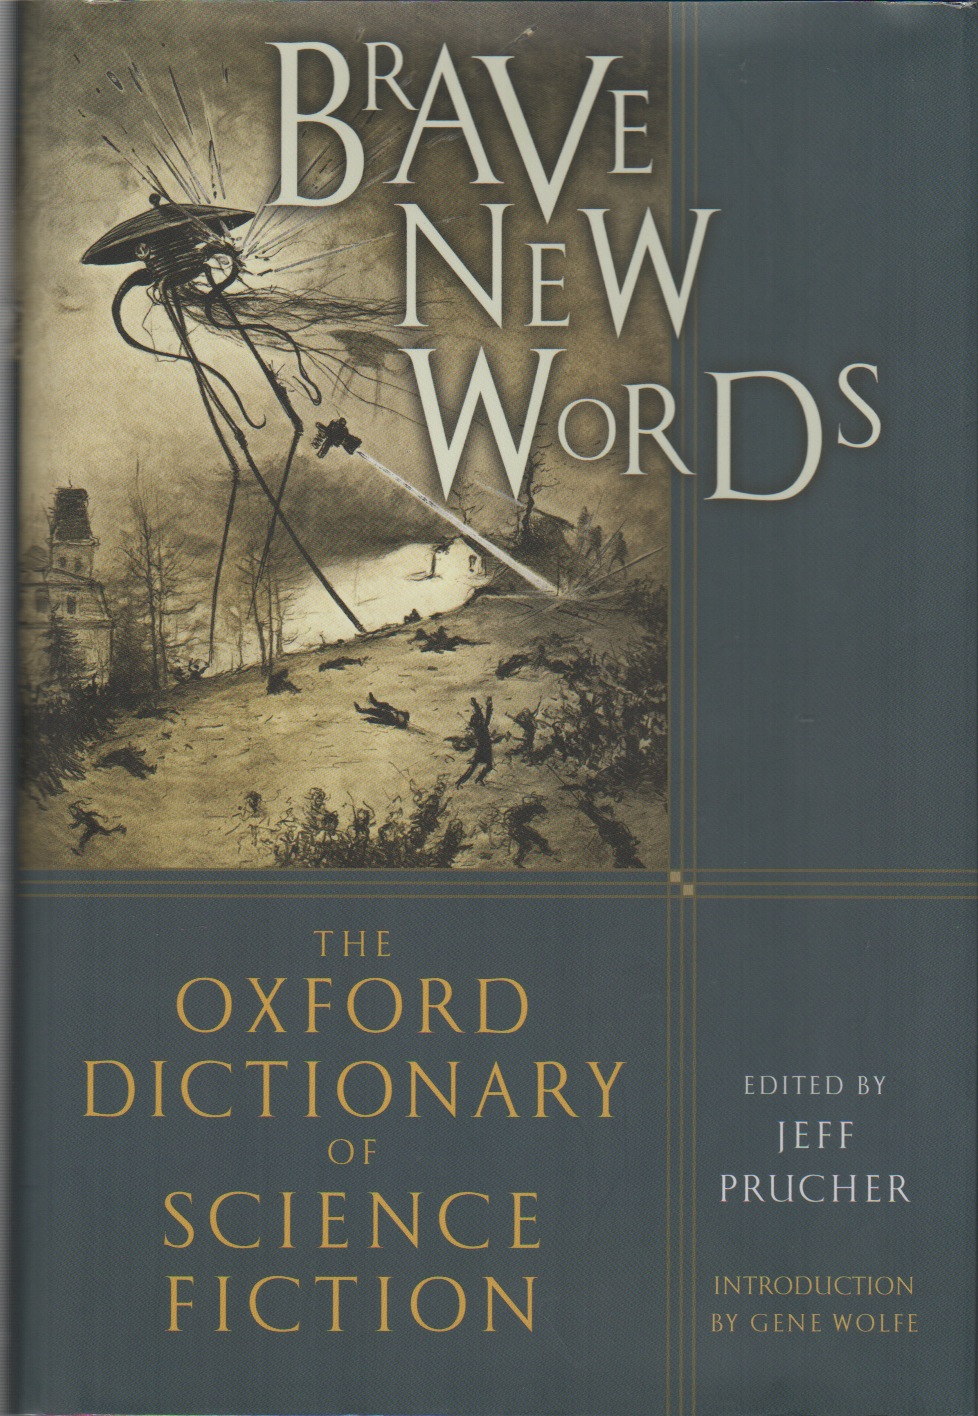 BRAVE NEW WORDS: The Oxford Dictionary of Science Fiction - PRUCHER, Jeff (Editor); Gene Wolfe (Introduction)